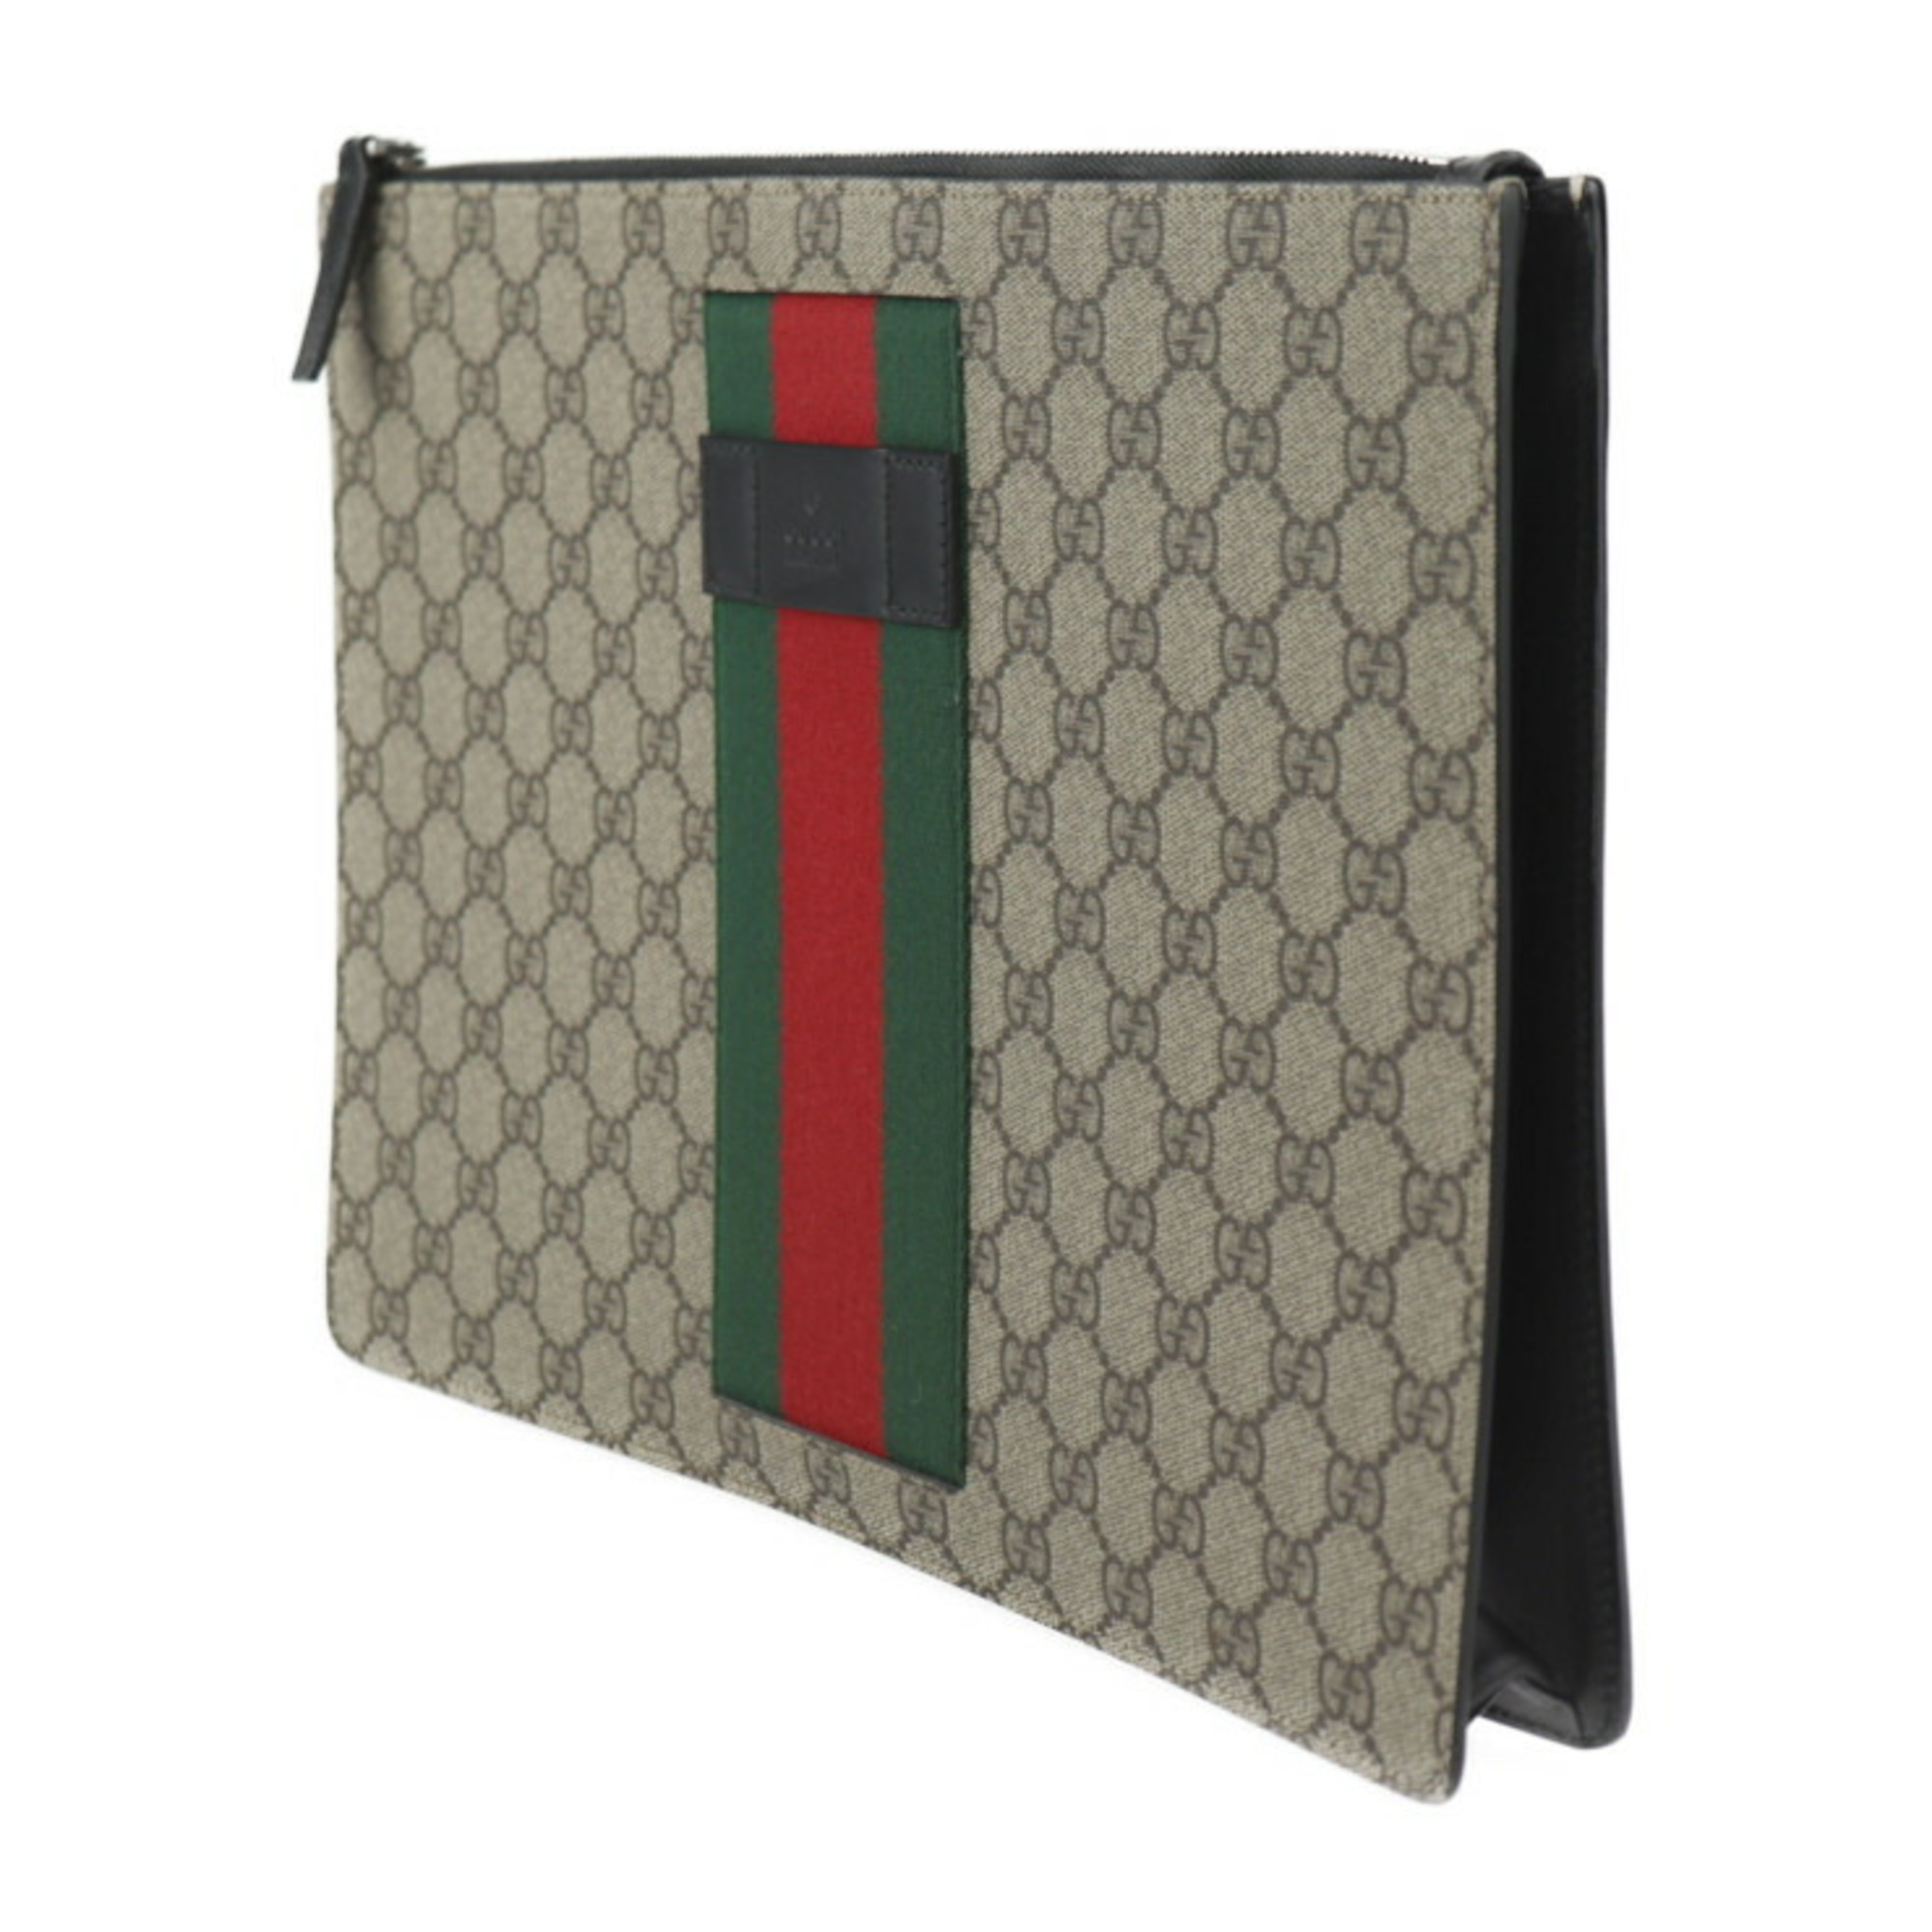 GUCCI Gucci Clutch Bag Sherry Line Second 433665 GG Supreme Canvas Leather Beige Green Red Wristlet Pouch